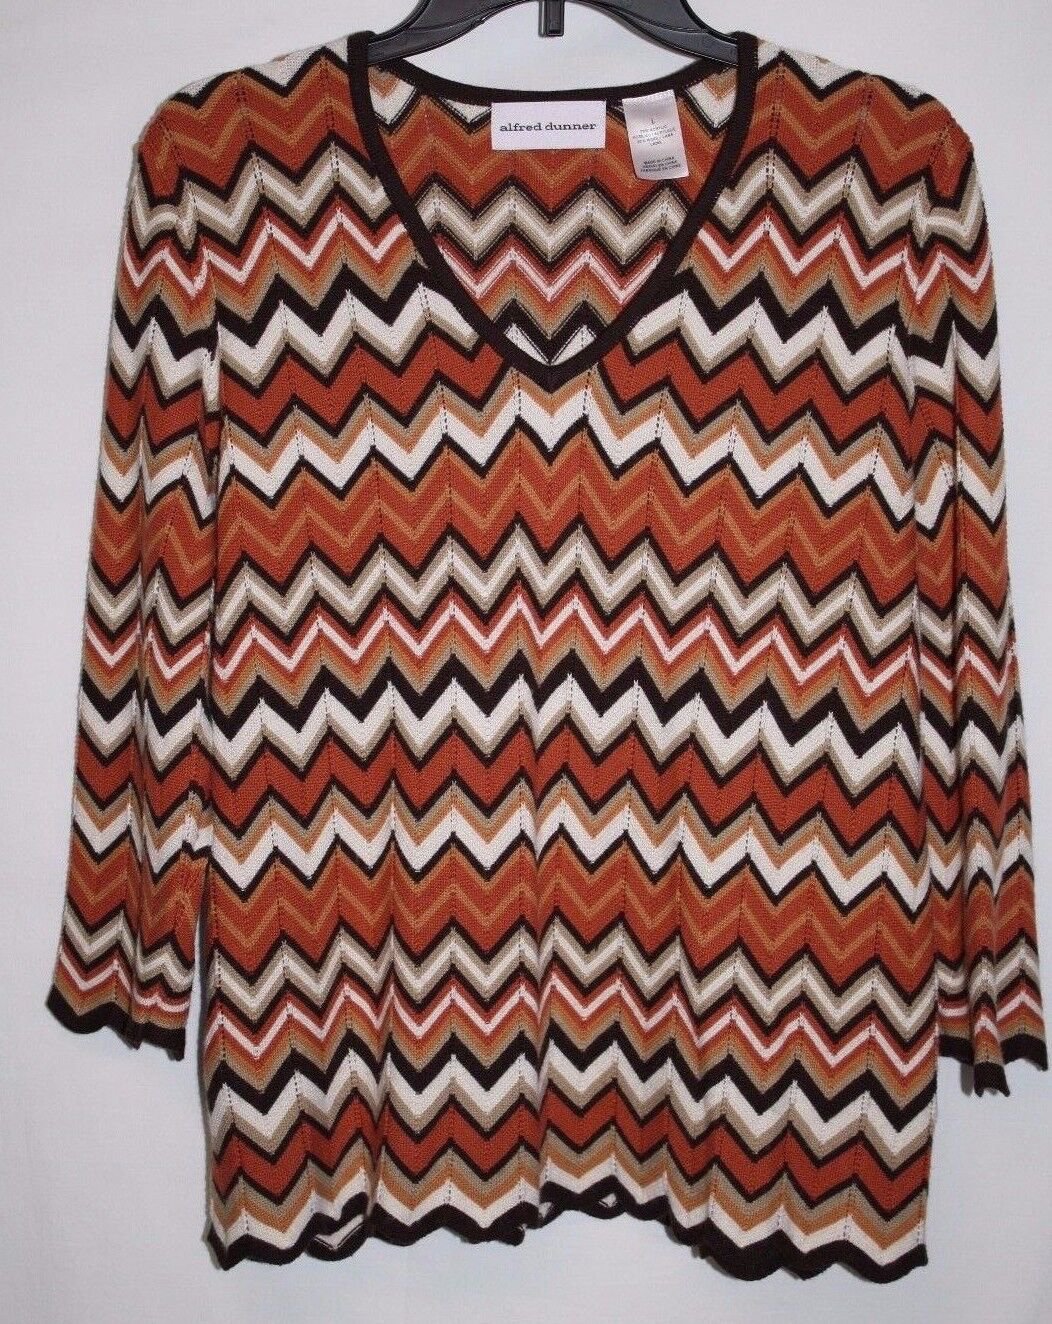 Alfred Dunner Misses LARGE Fall Chevron ZigZag Sweater Acrylic Wool